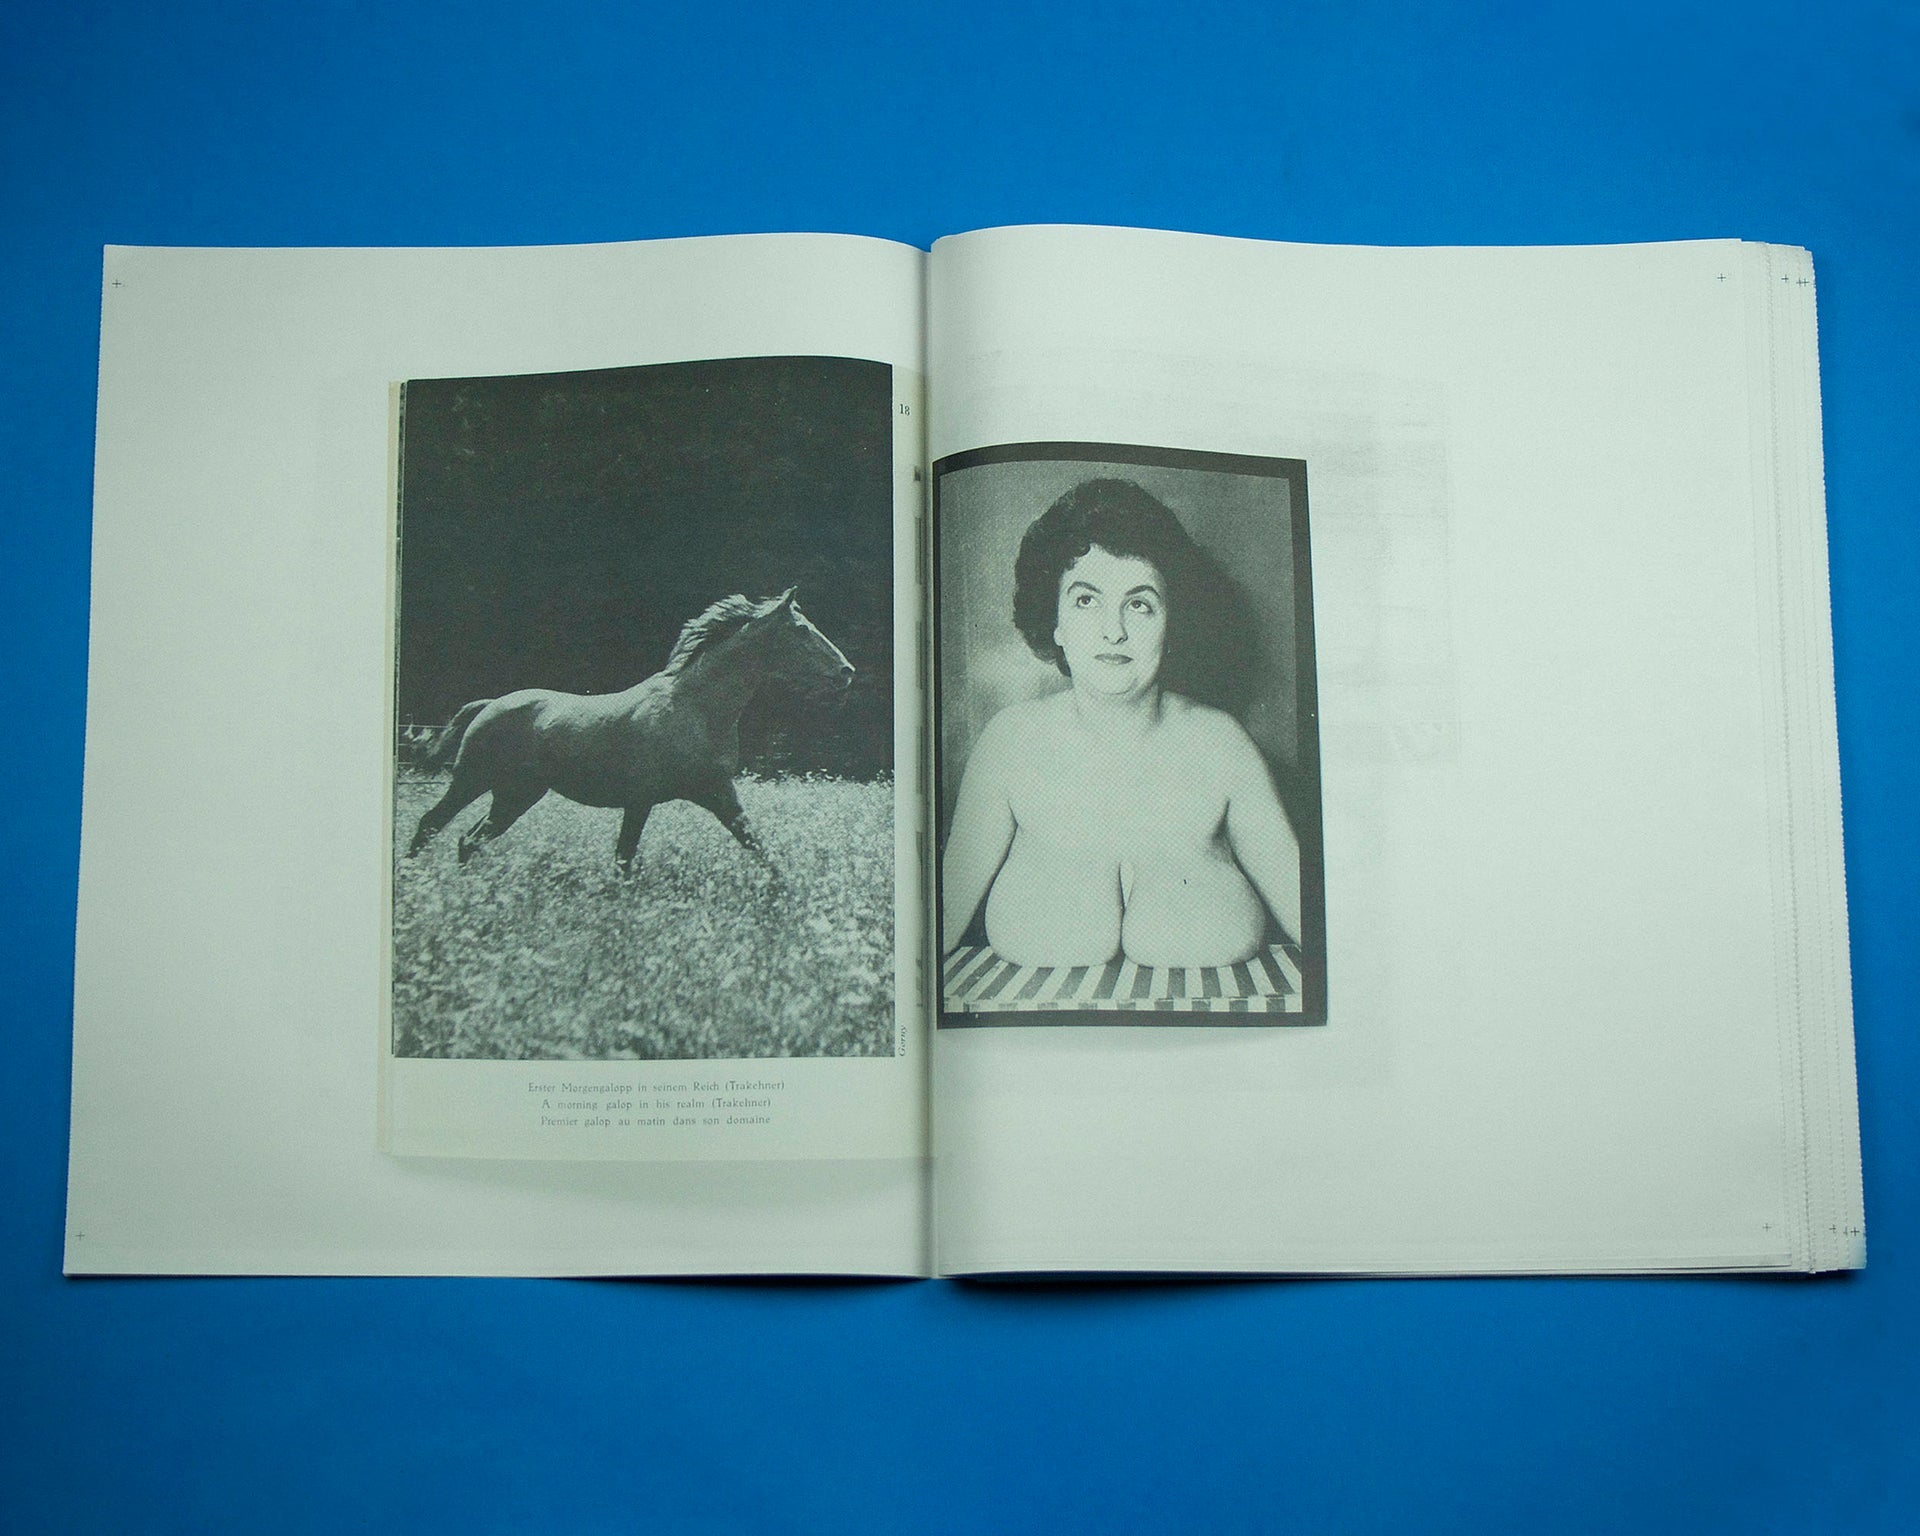 Incredibly small photobooks by Paul Kooker and Erik Kessels